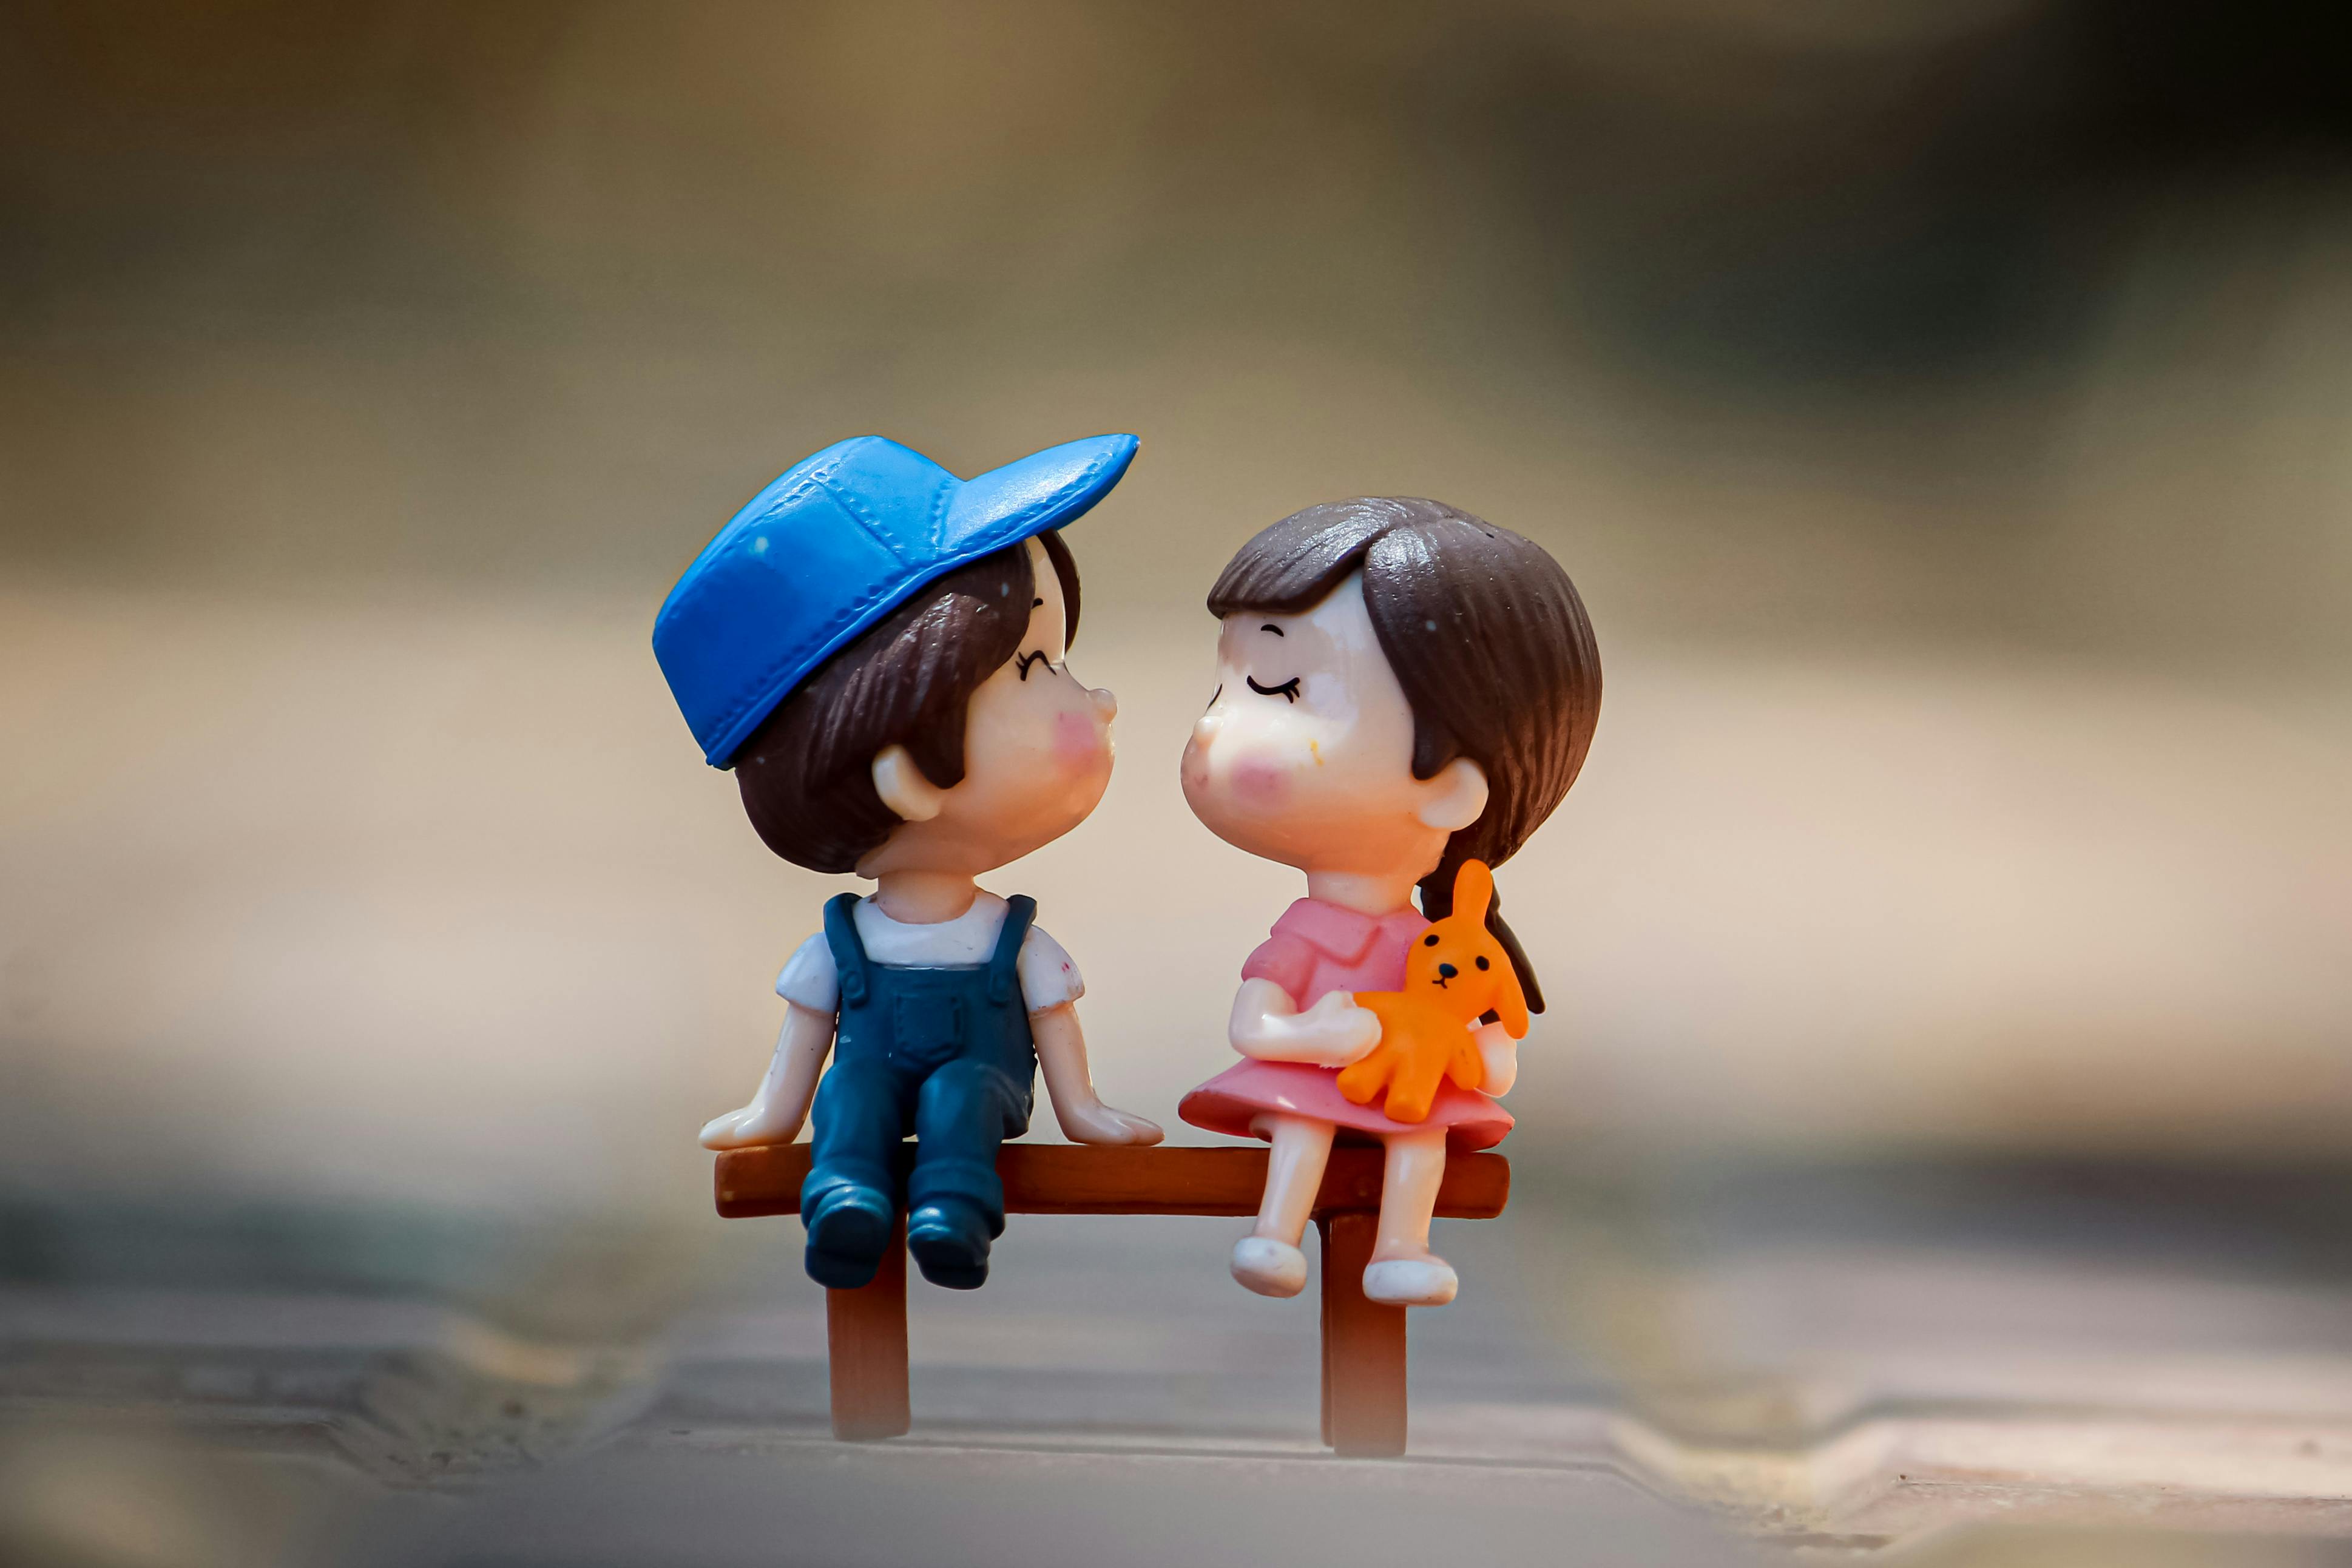 Figurine of boy and girl on bench · Free Stock Photo